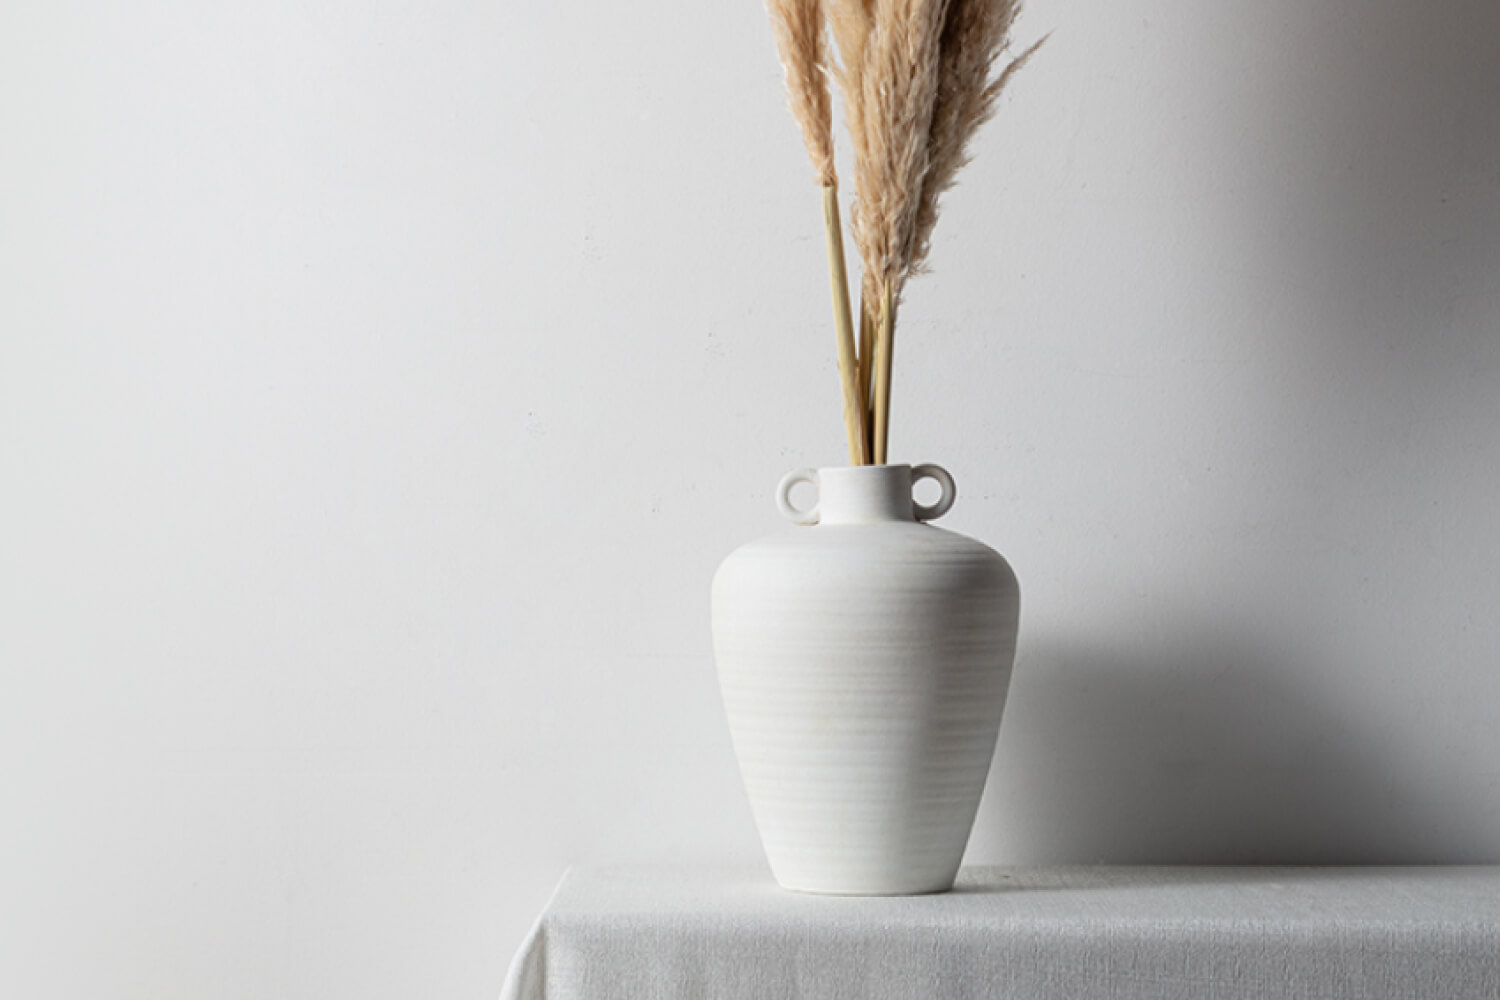 Meadow Decorative Tall White Nordic Ceramic Vessel Vase With Handles by Eternity Modern.